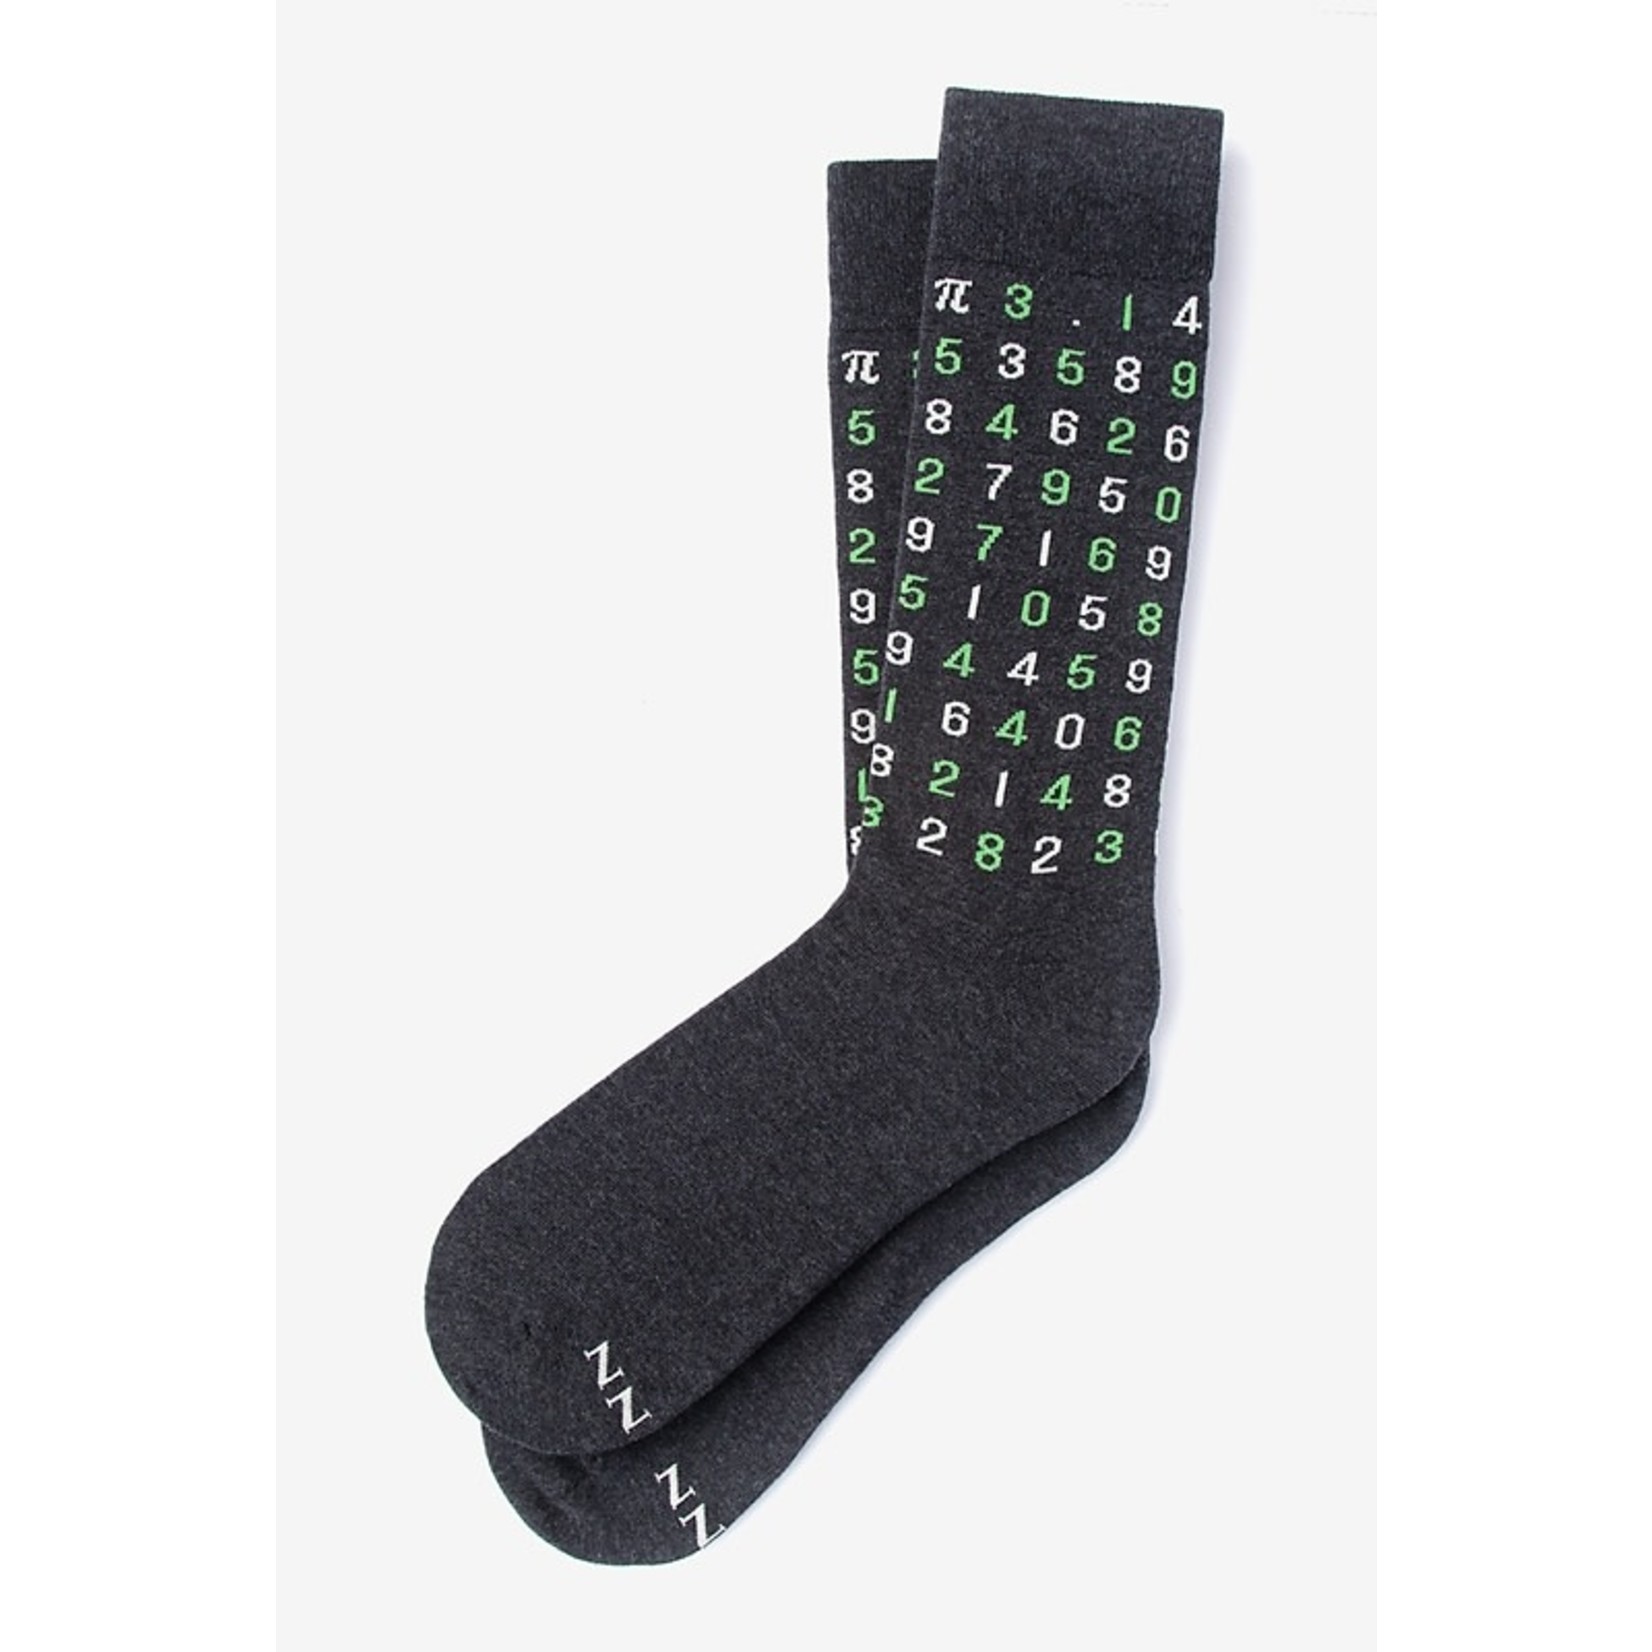 Science and Technology 98 Digits of Pi SOCKS